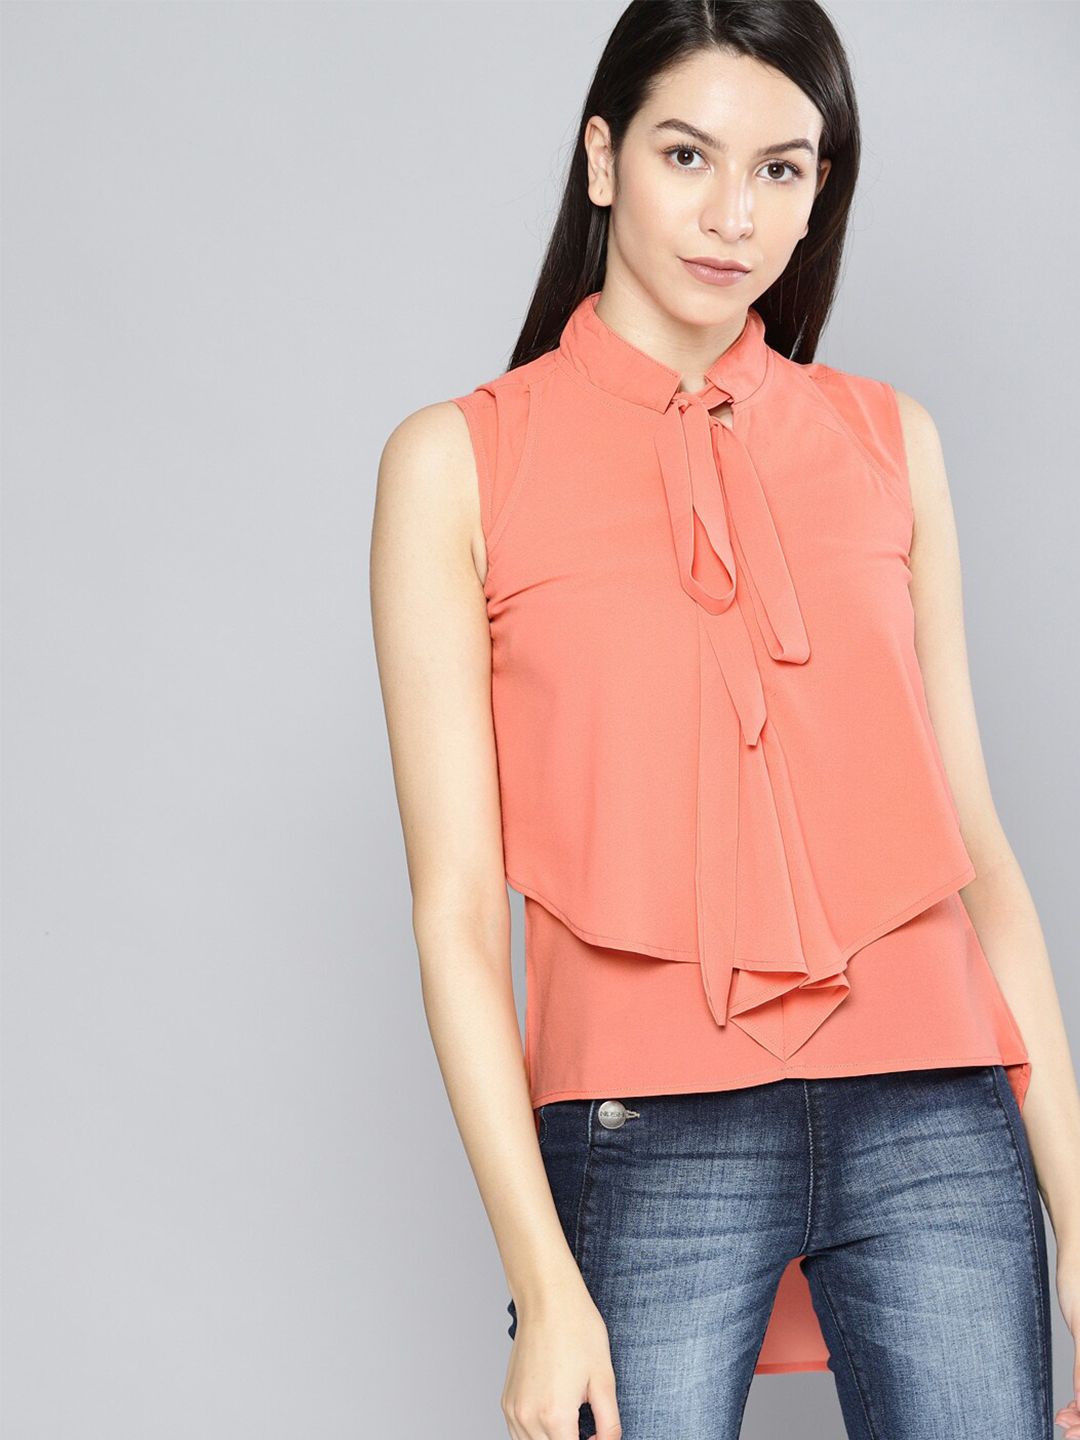 Mast & Harbour Coral Tie-Up Neck Sleeveless Top Price in India